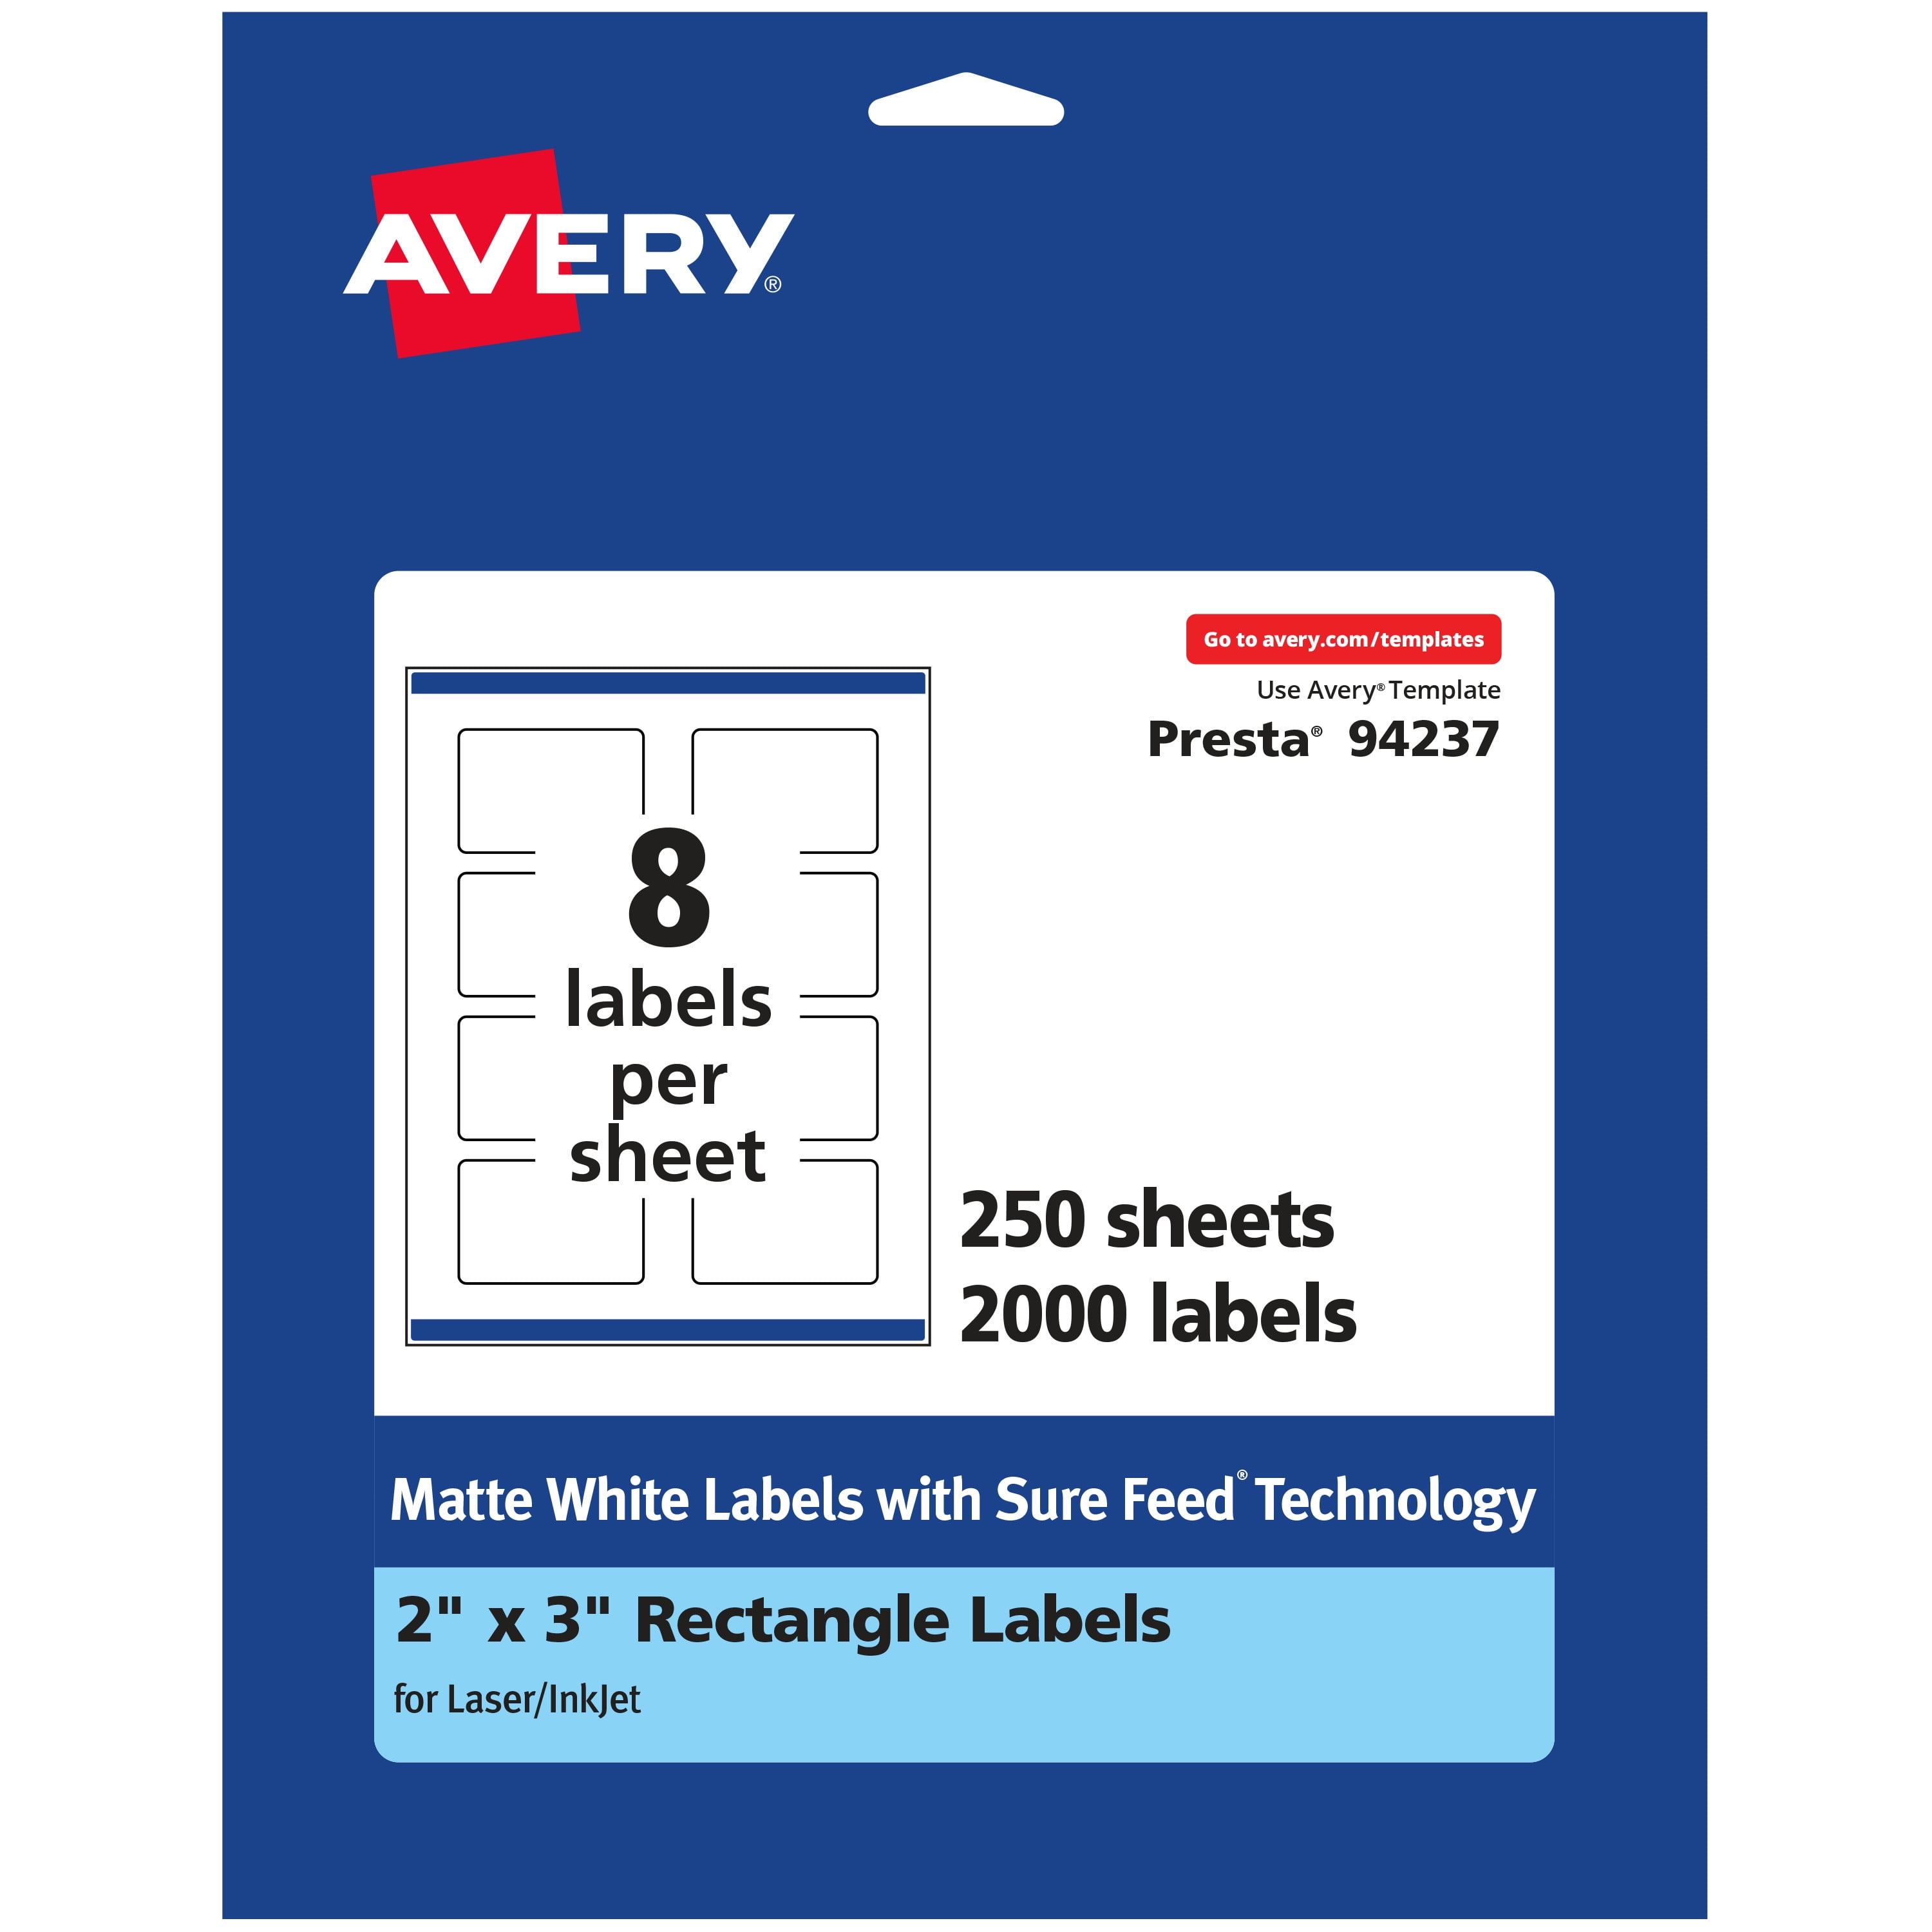 avery-matte-white-rectangle-labels-with-sure-feed-2-x-3-2-000-matte